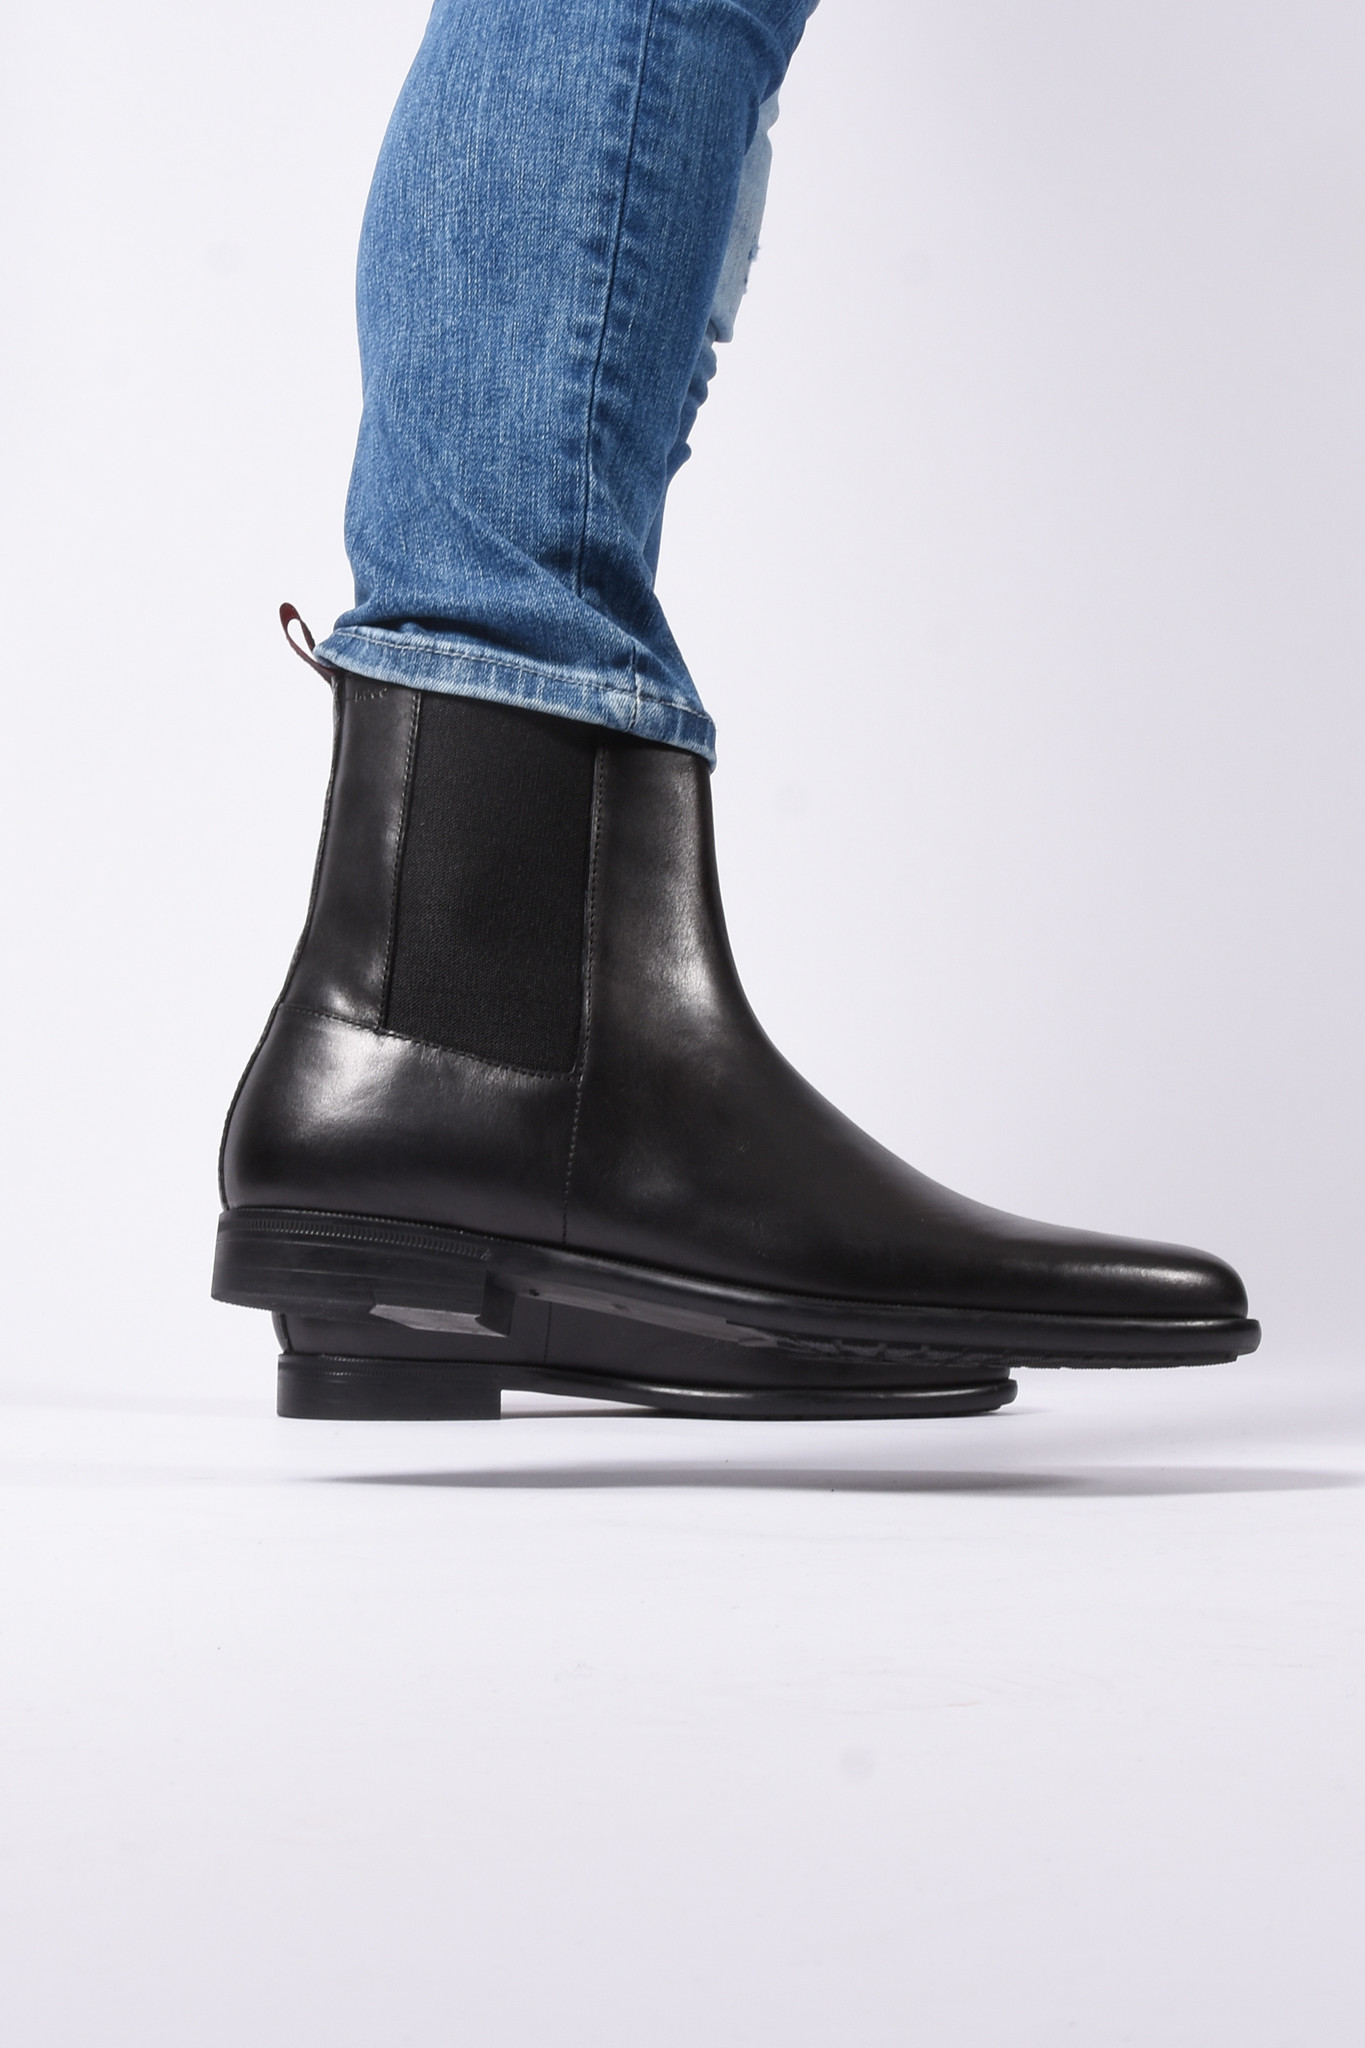 Inficere Banquet kirurg Hugo Boss FW22 - Kyron_Cheb_It Chelsea Boots - Black - Strictly for Men